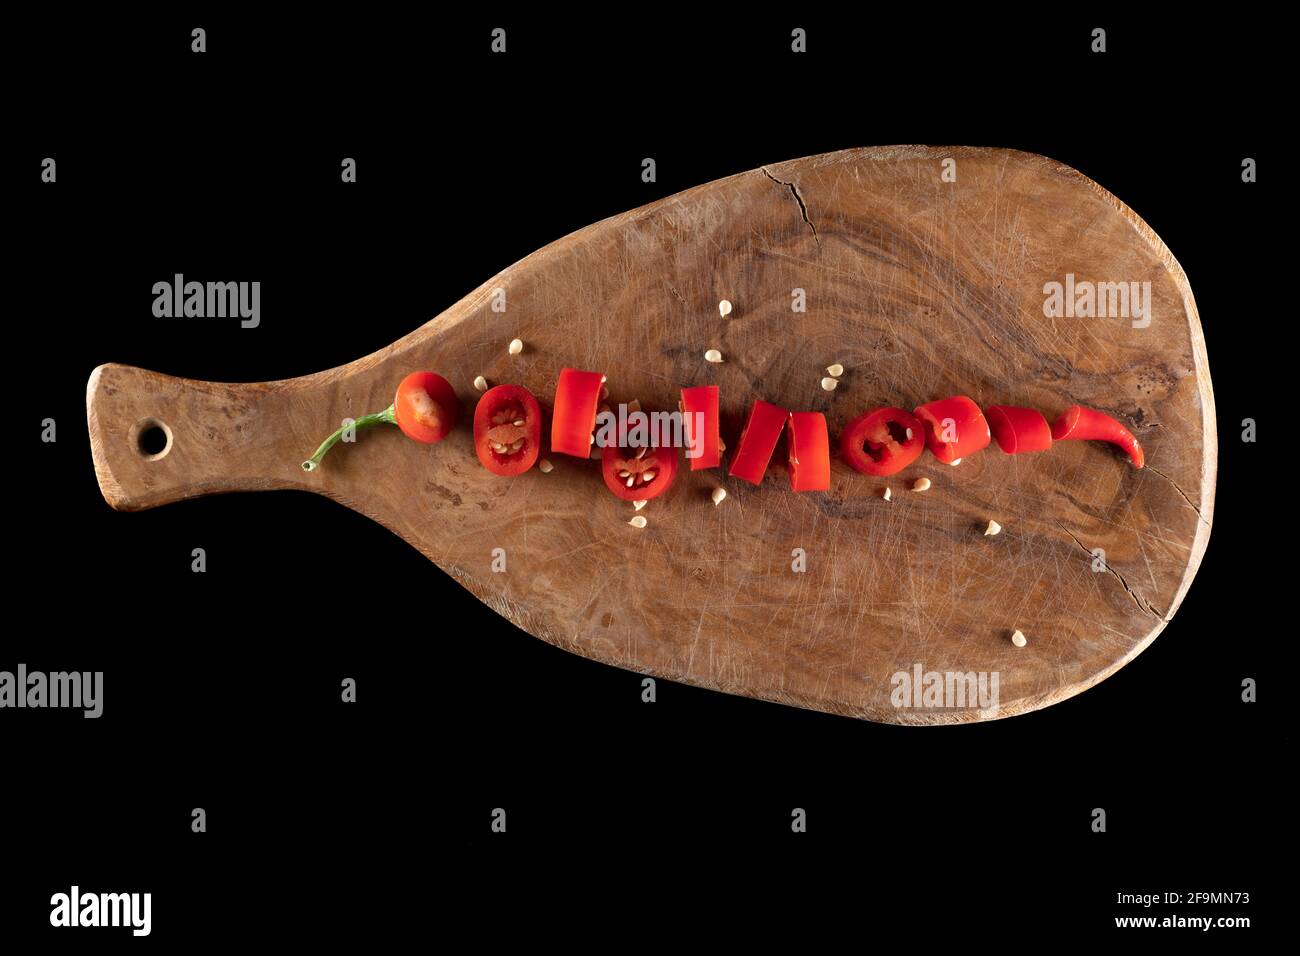 Cayenne, long red chili peppers on cutting board Stock Photo